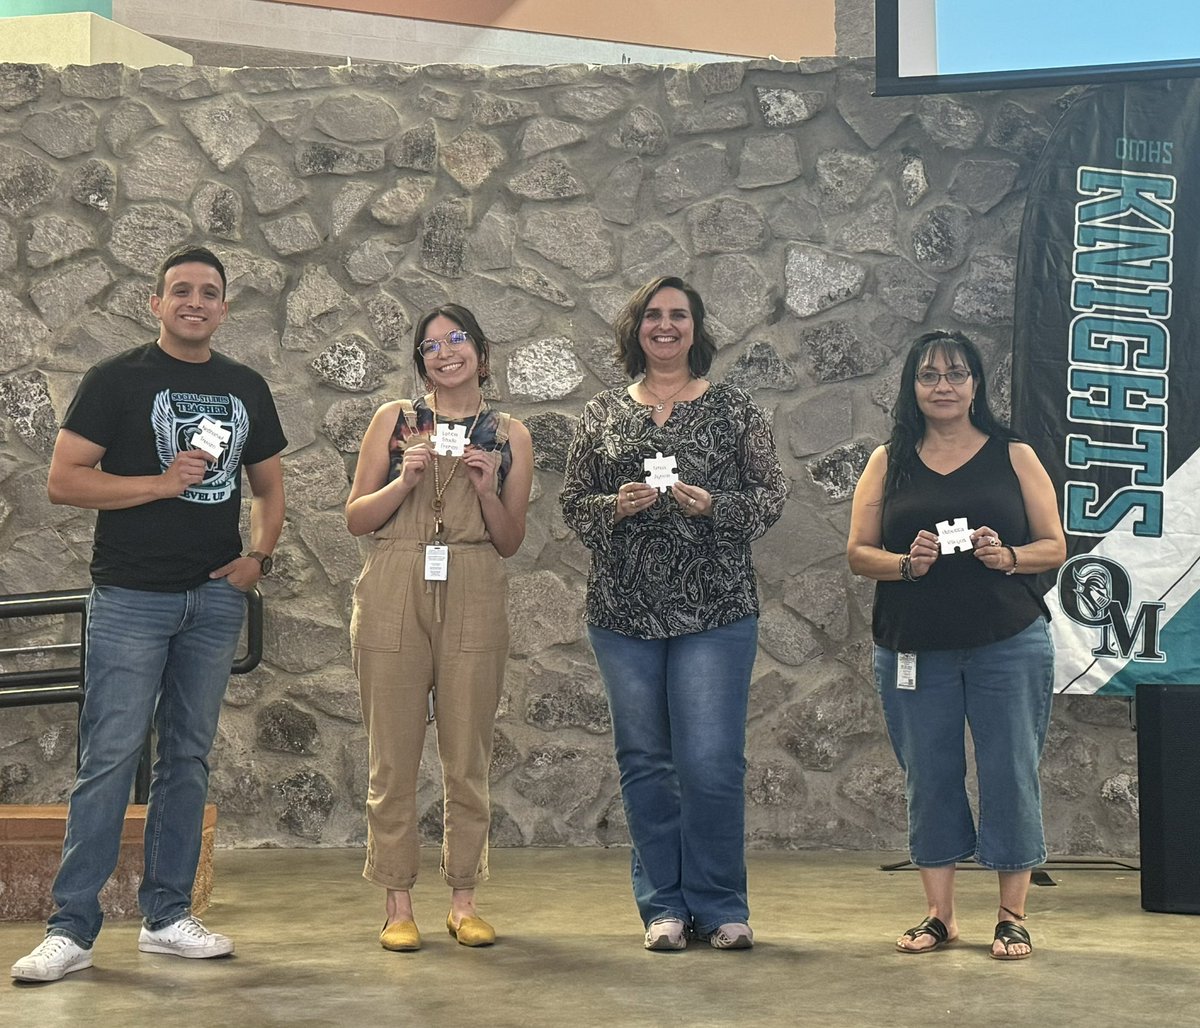 Celebrating our two retirees Ms. Perez and Ms Tarin. Congratulations on your on your retirement & thank you for your dedication to OMHS. A heartfelt goodbye to Mr. Trevizo, Ms. Franco-Steele, Ms Agnew & Ms. Villegas as they depart for new ventures. Once a Knight always a Knight!